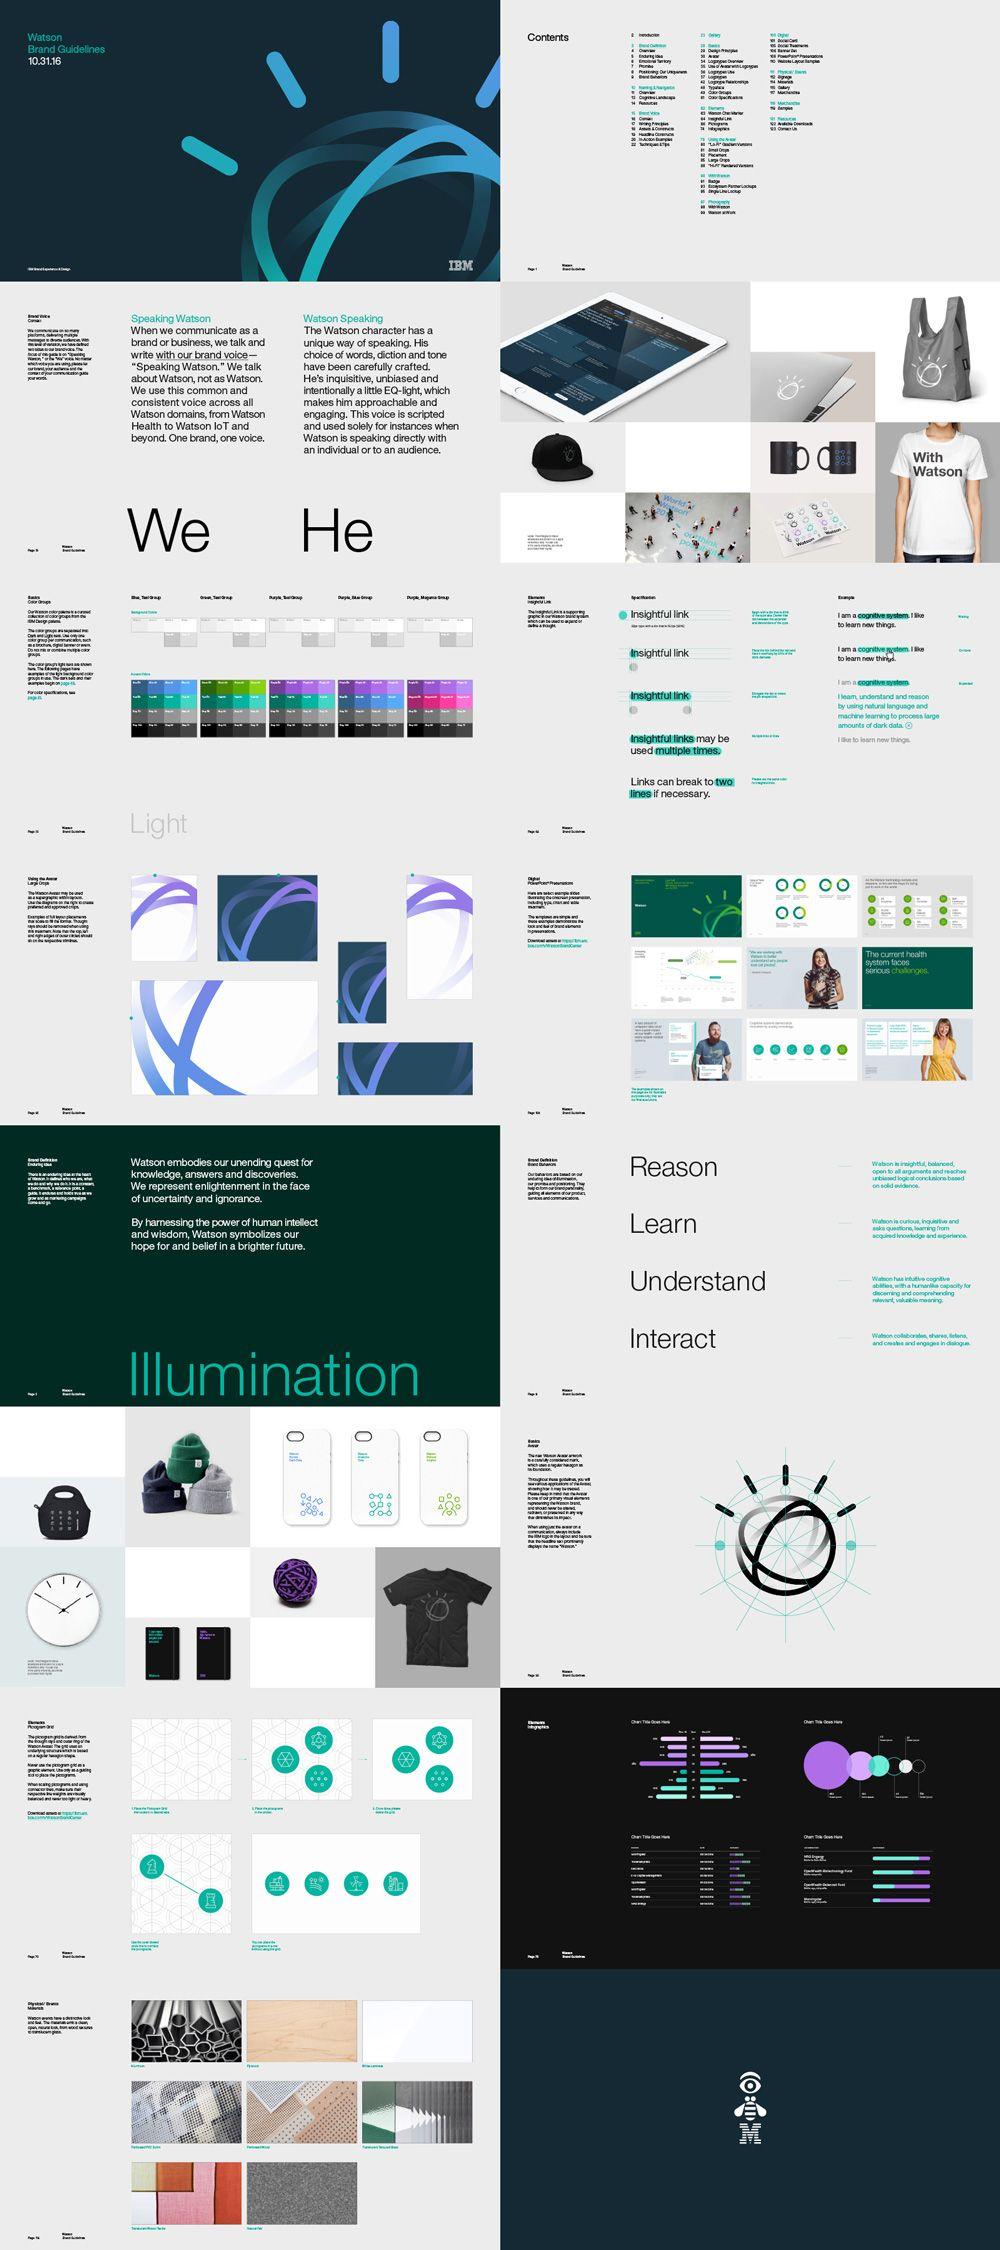 Use IBM Watson Logo - Brand New: New Logo And Identity For IBM Watson Done In House With